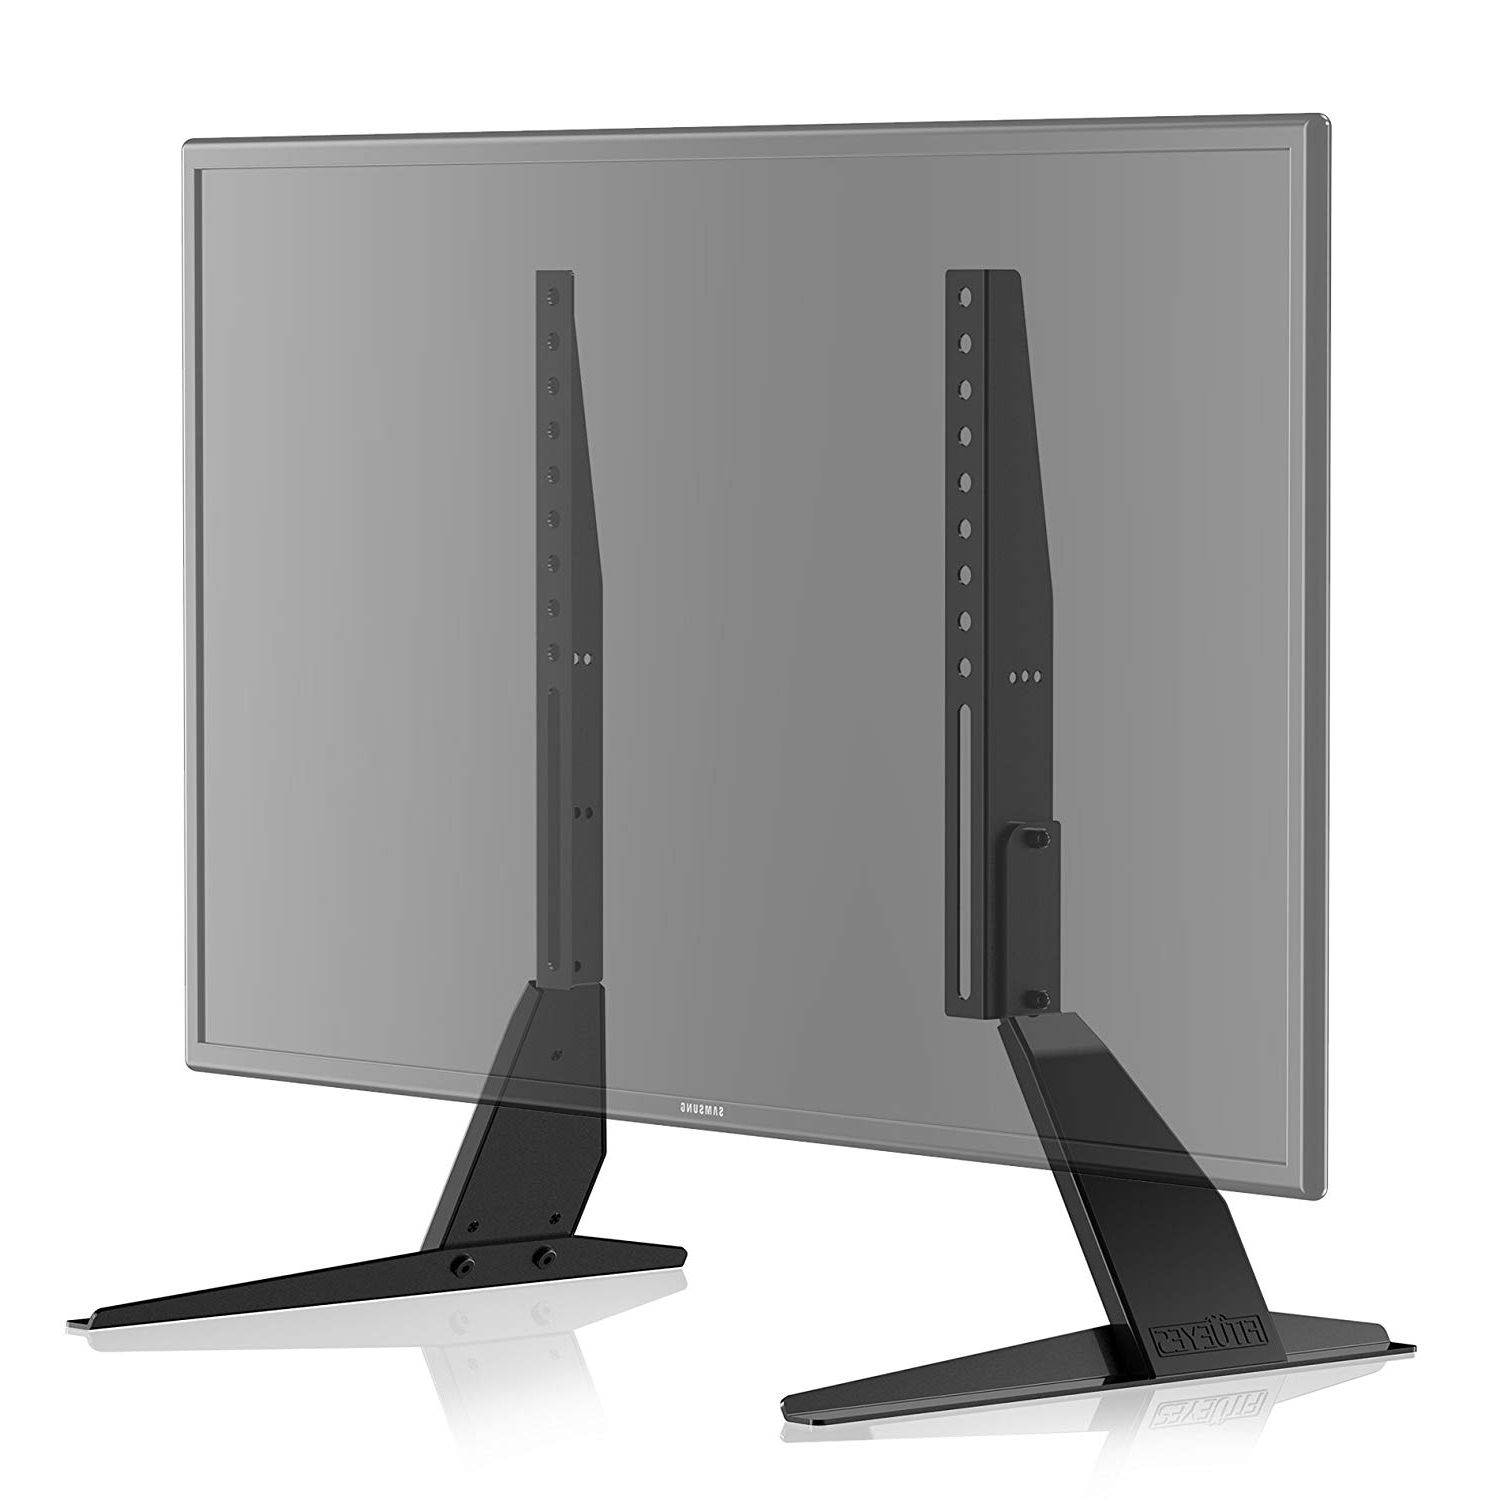 Fitueyes Universal Tabletop Tv Stand With Mount For 23" To 42" Flat Regarding Famous Universal Flat Screen Tv Stands (View 2 of 20)